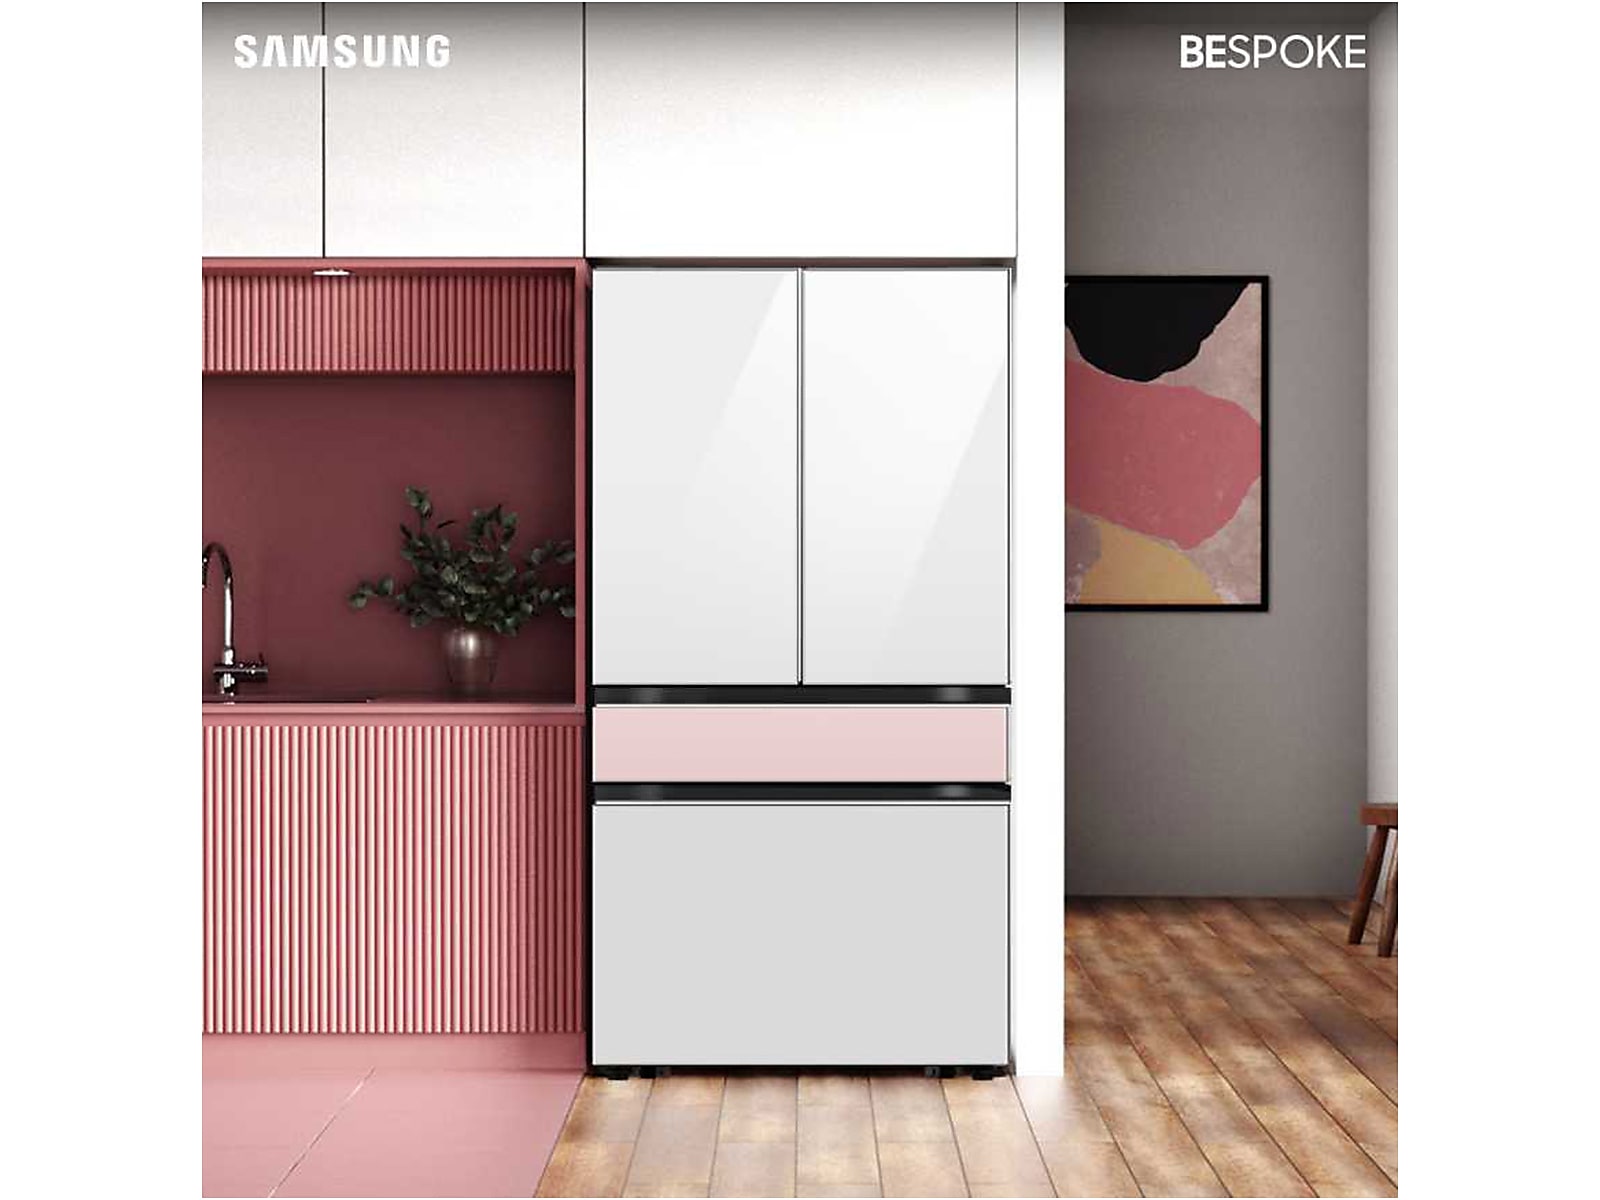 Samsung Bespoke 4-Door French Door Refrigerator (23 cu. ft.) with Beverage Center™ in White Glass with Pink Glass Middle Panel(BNDL-1646347973481)